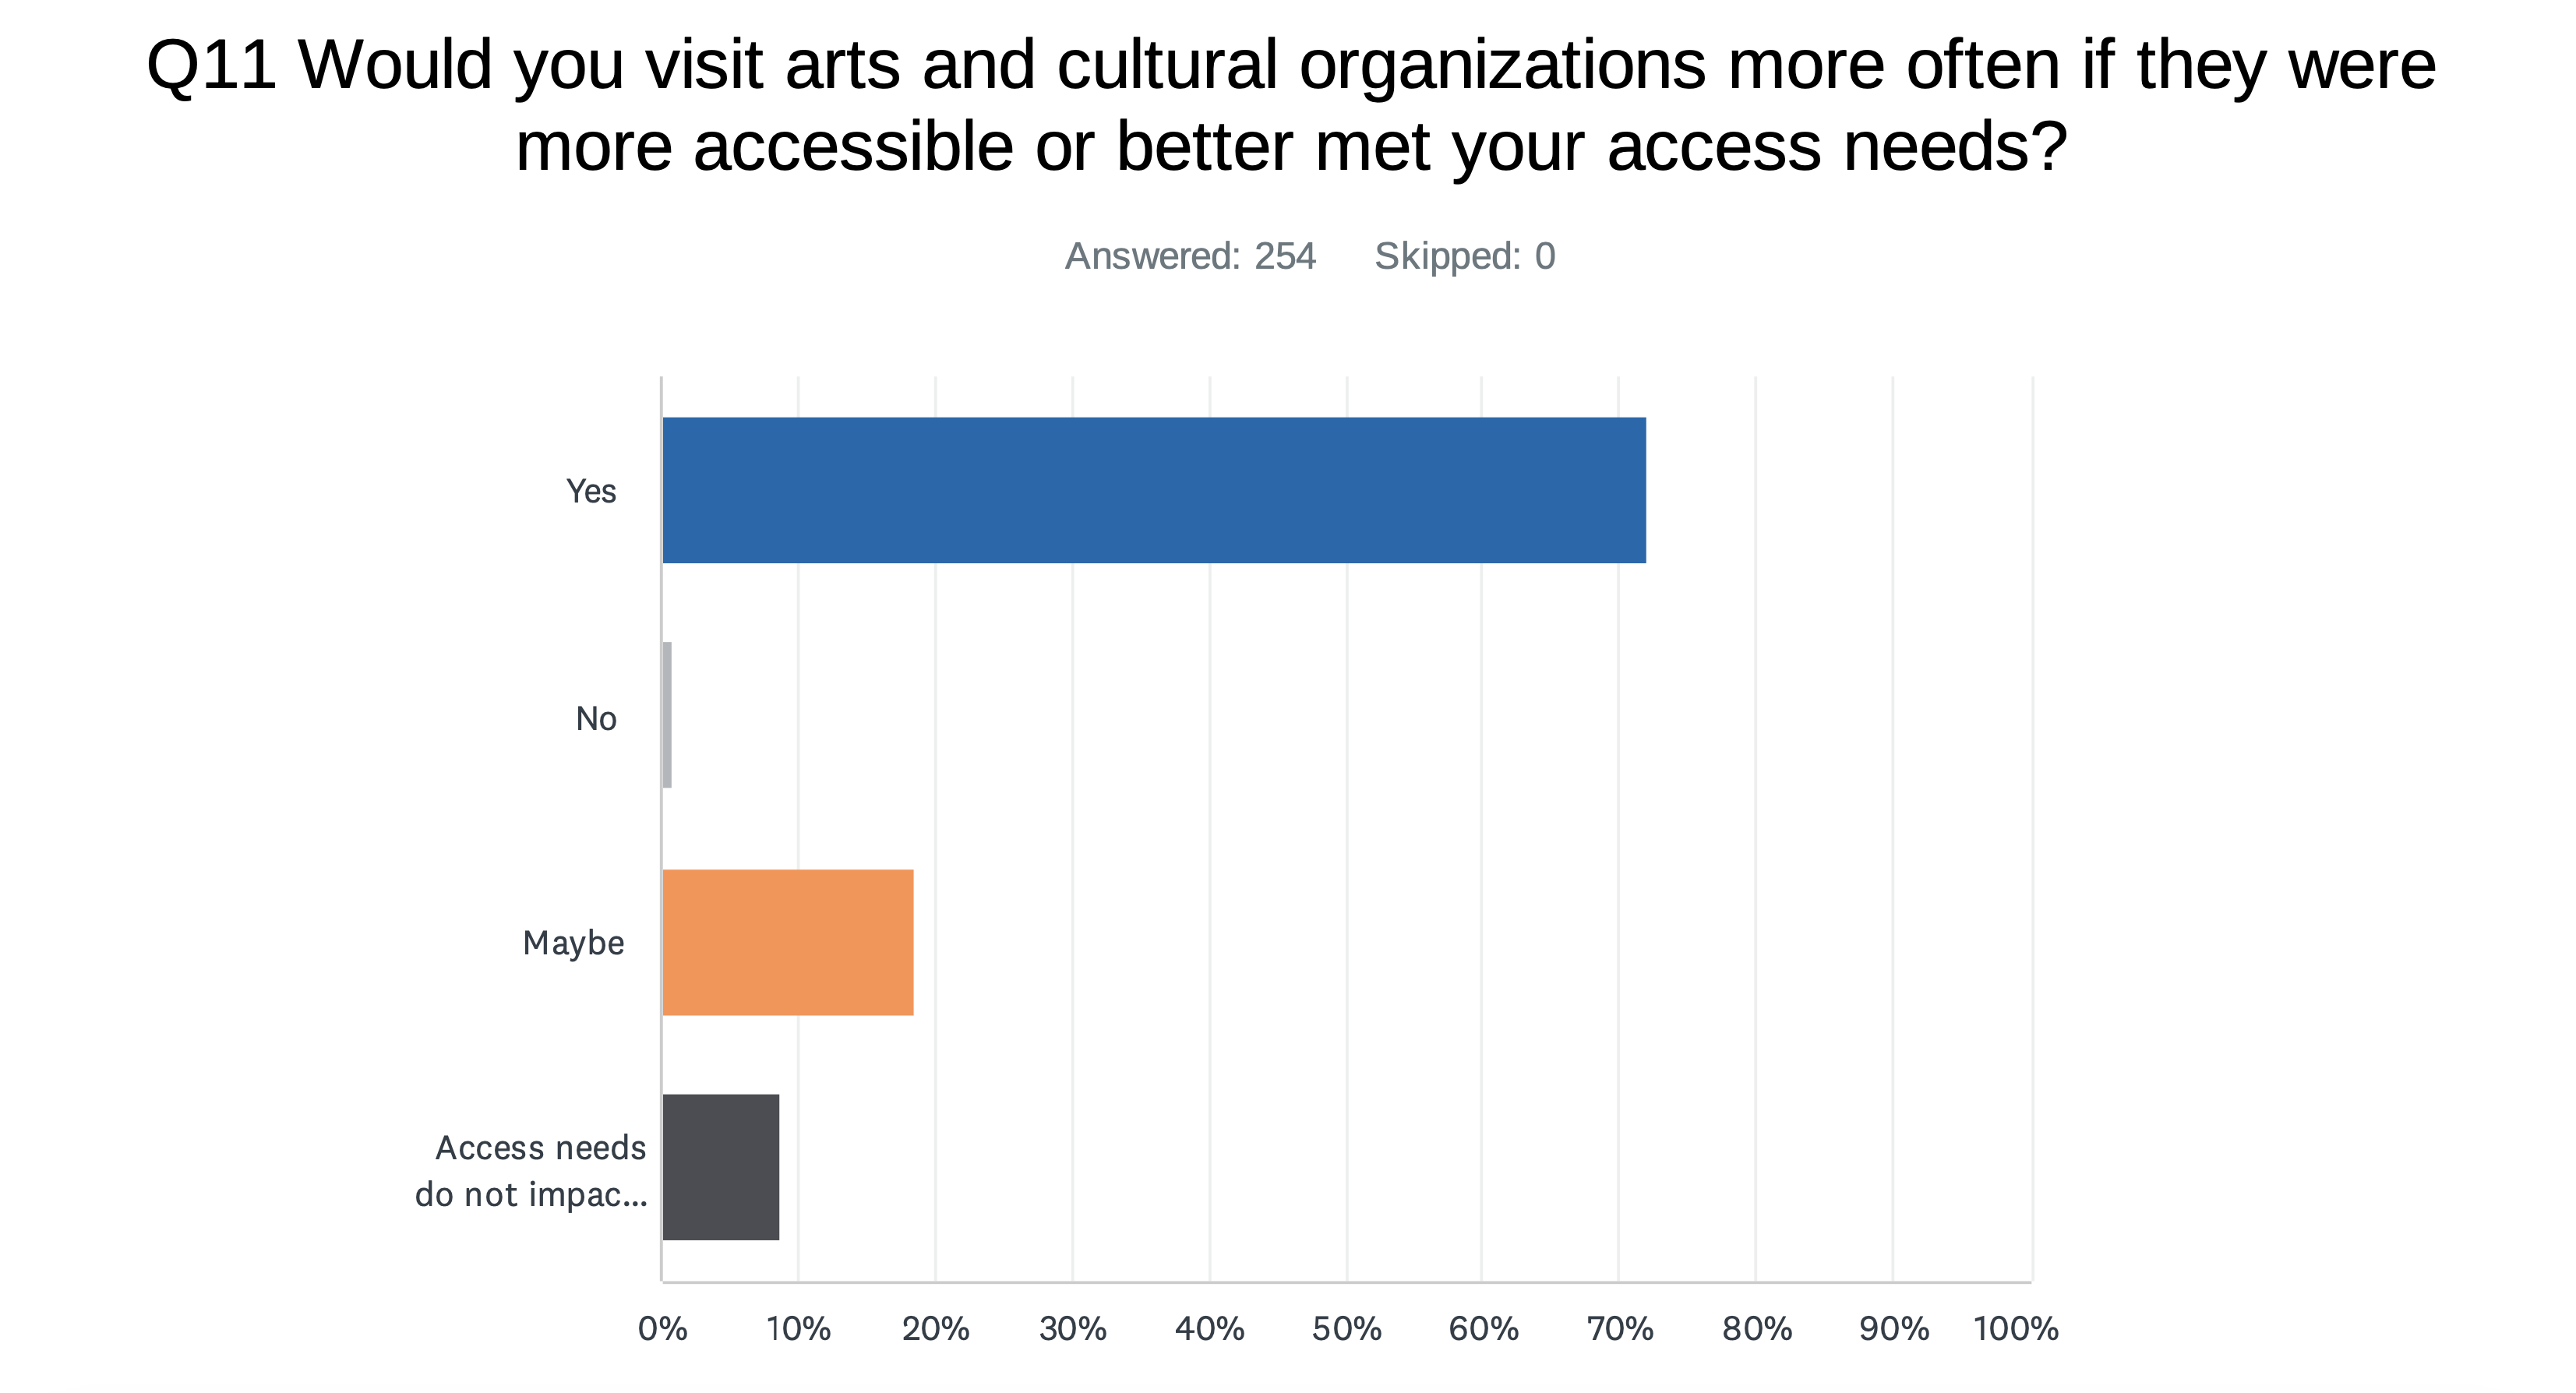 Bar graph that visually portrays the results from the Open Door Arts survey question.